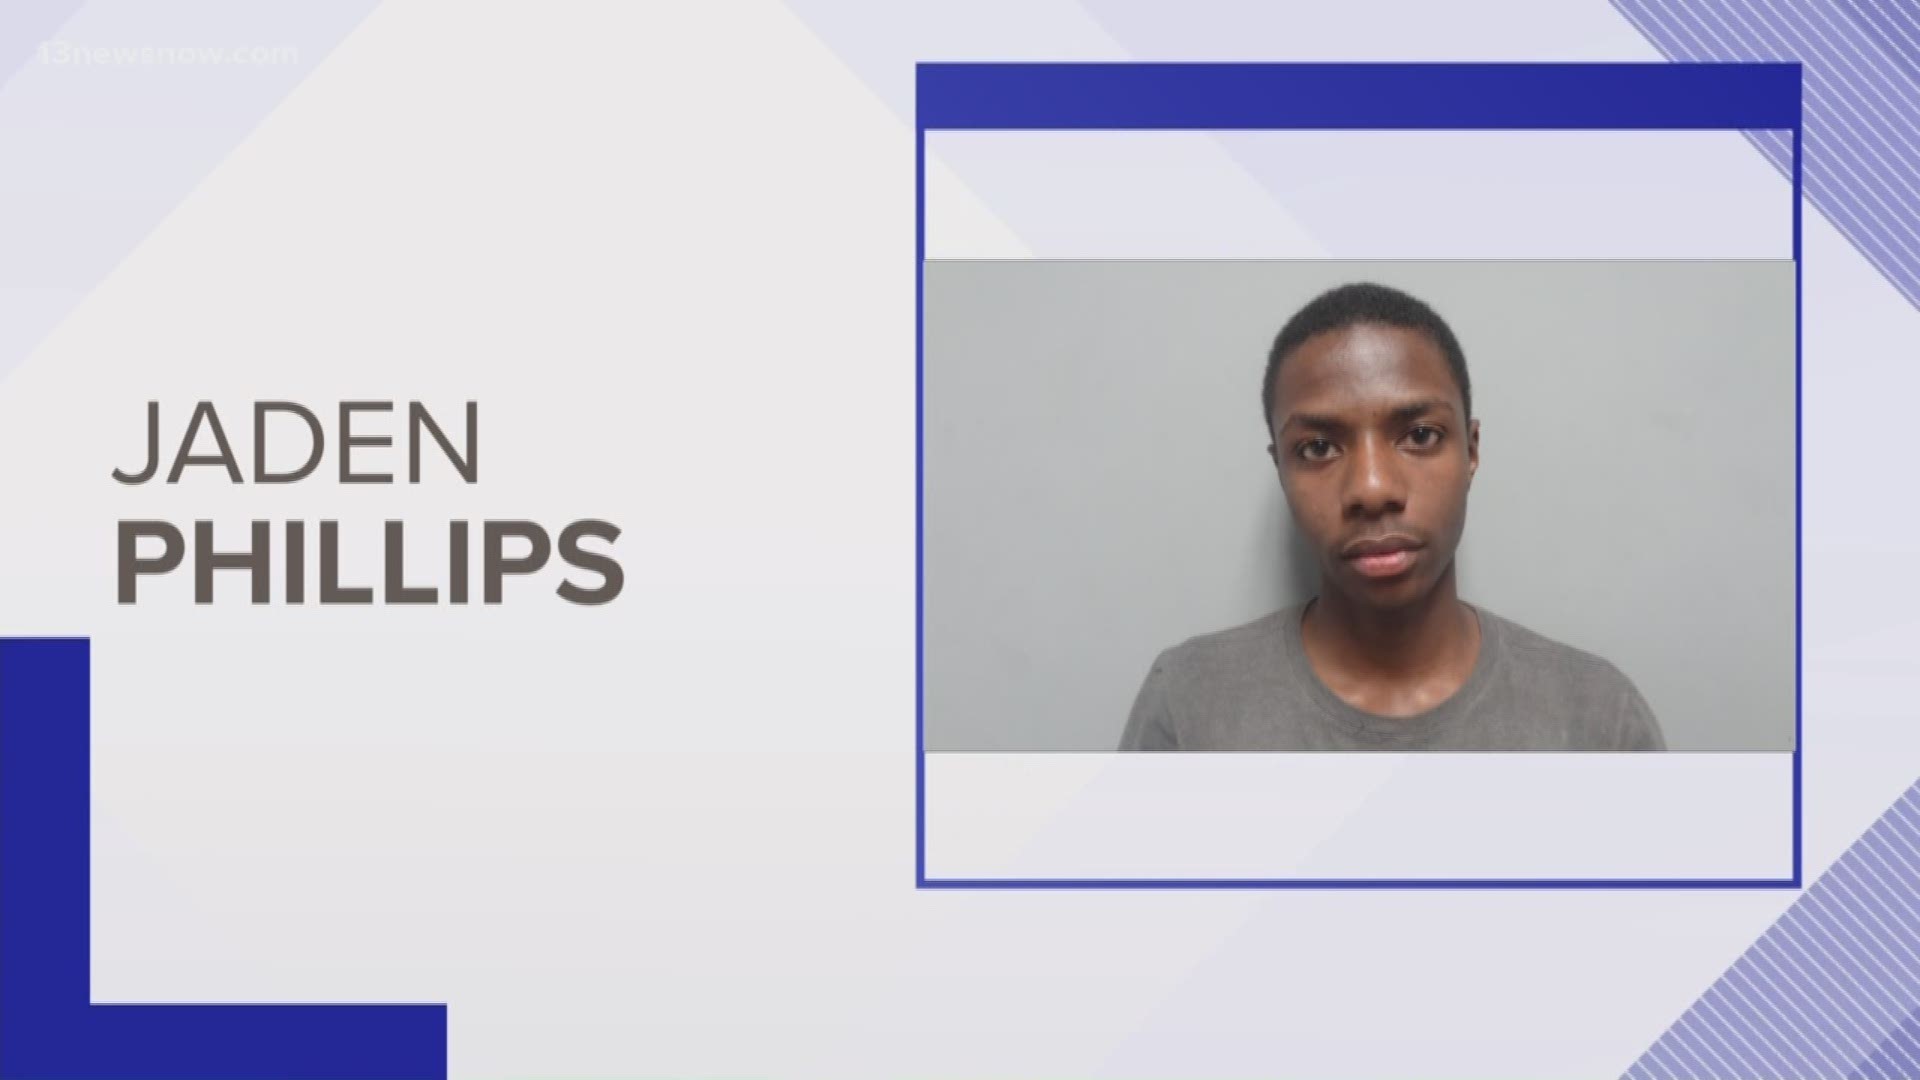 The Southampton County Sheriff's Office arrested 18-year-old Jaden Phillips in connection to several Southampton High School students being hospitalized after ingesting an unknown substance.